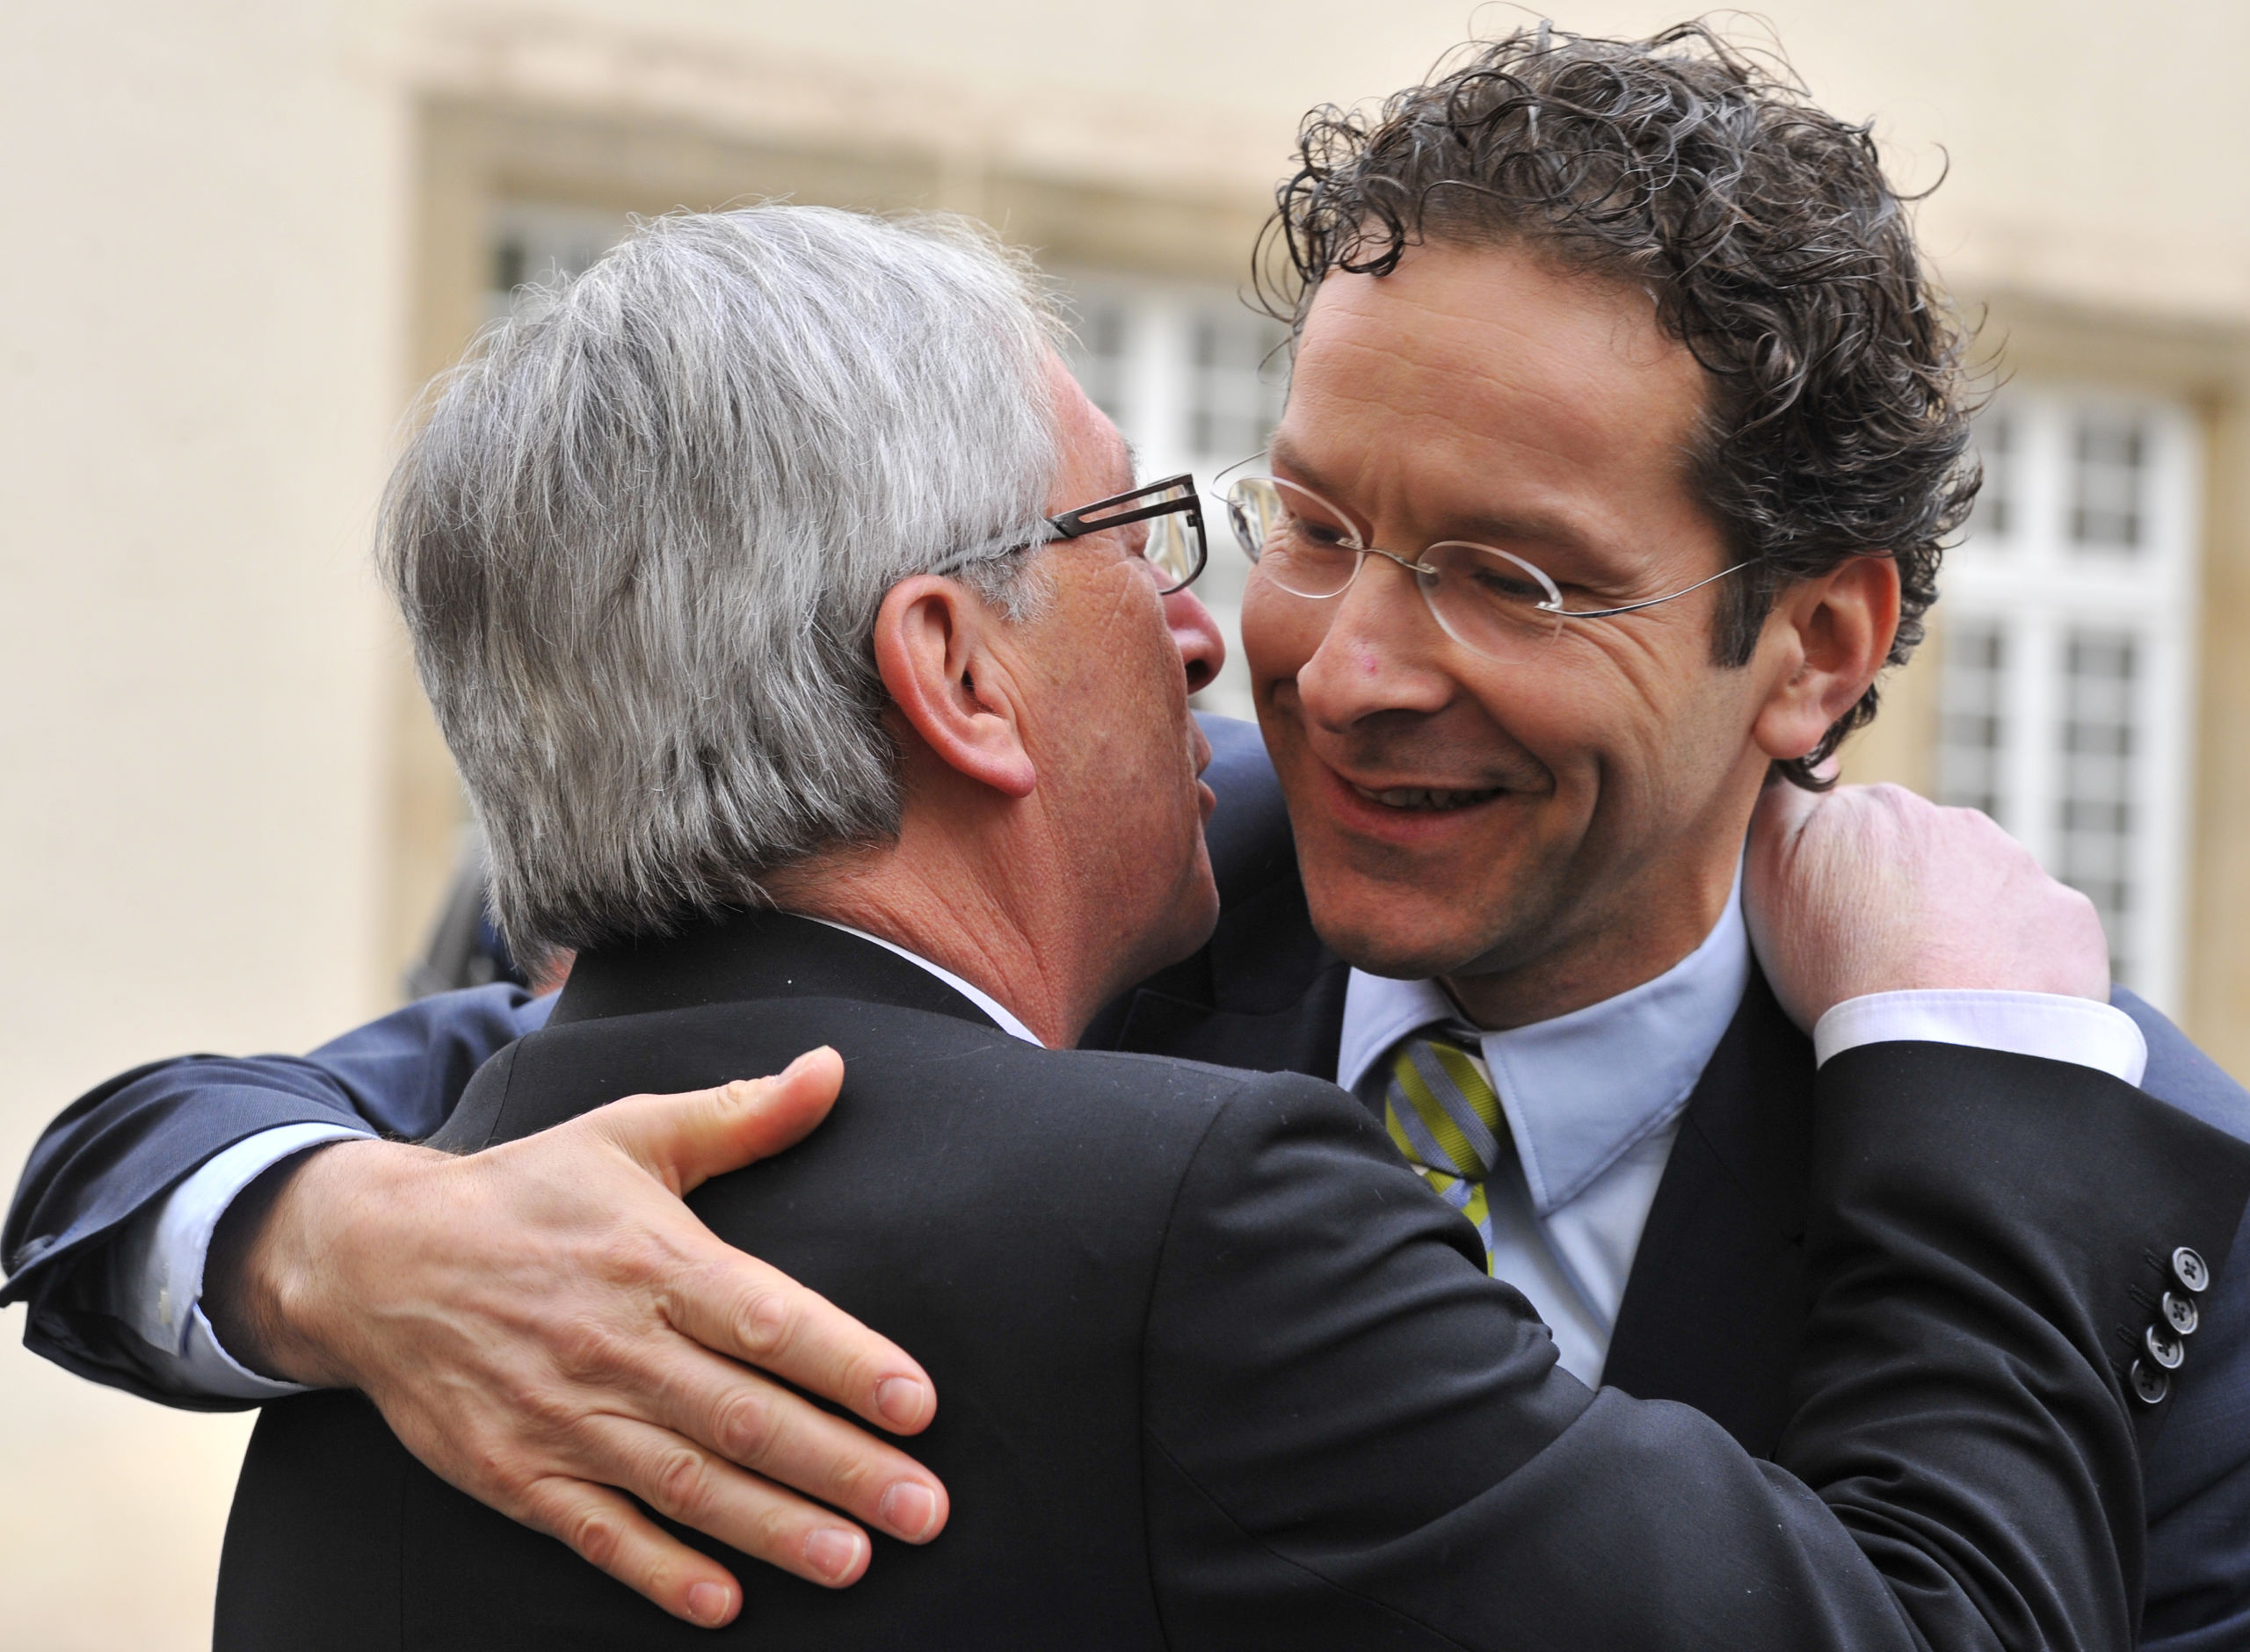 2013-01-18 14:45:07 Luxembourg Prime Minister and Eurogroup president Jean-Claude Juncker (L) welcomes Dutch Finance Minister Jeroen Dijsselbloem at the Hotel de Bourgogne before a meeting in Luxembourg on January 18, 2013. Juncker and his probable successor as head of the Eurogroup are due to review the financial and economic situation in the Euro zone and the preparation of the next meeting of the Eurogroup, to be held on January 21 in Brussels. AFP PHOTO / GEORGES GOBET GEORGES GOBET / AFP